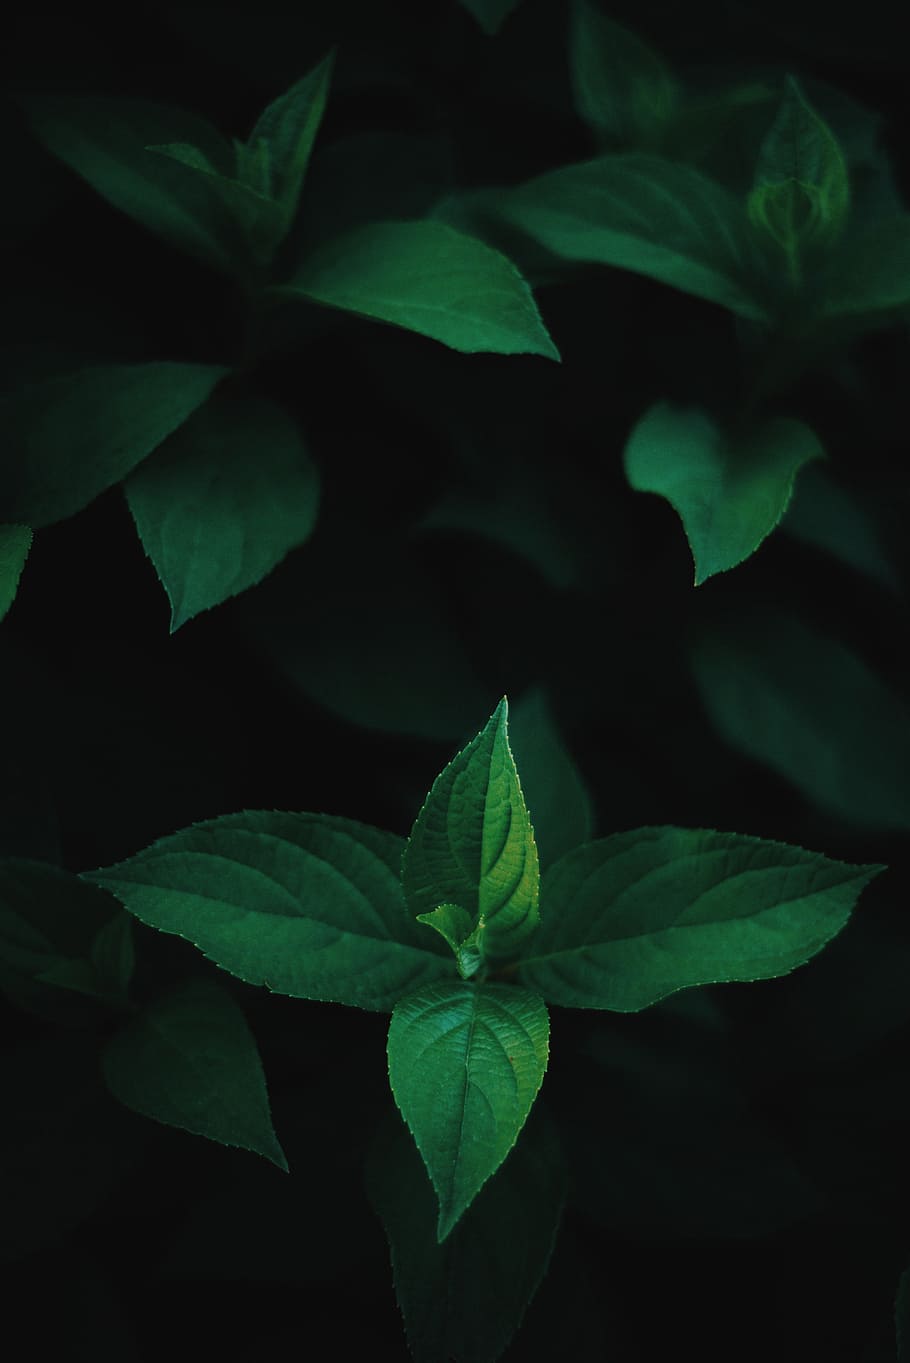 Green Leaf Background Hd Free Download - Check out this fantastic